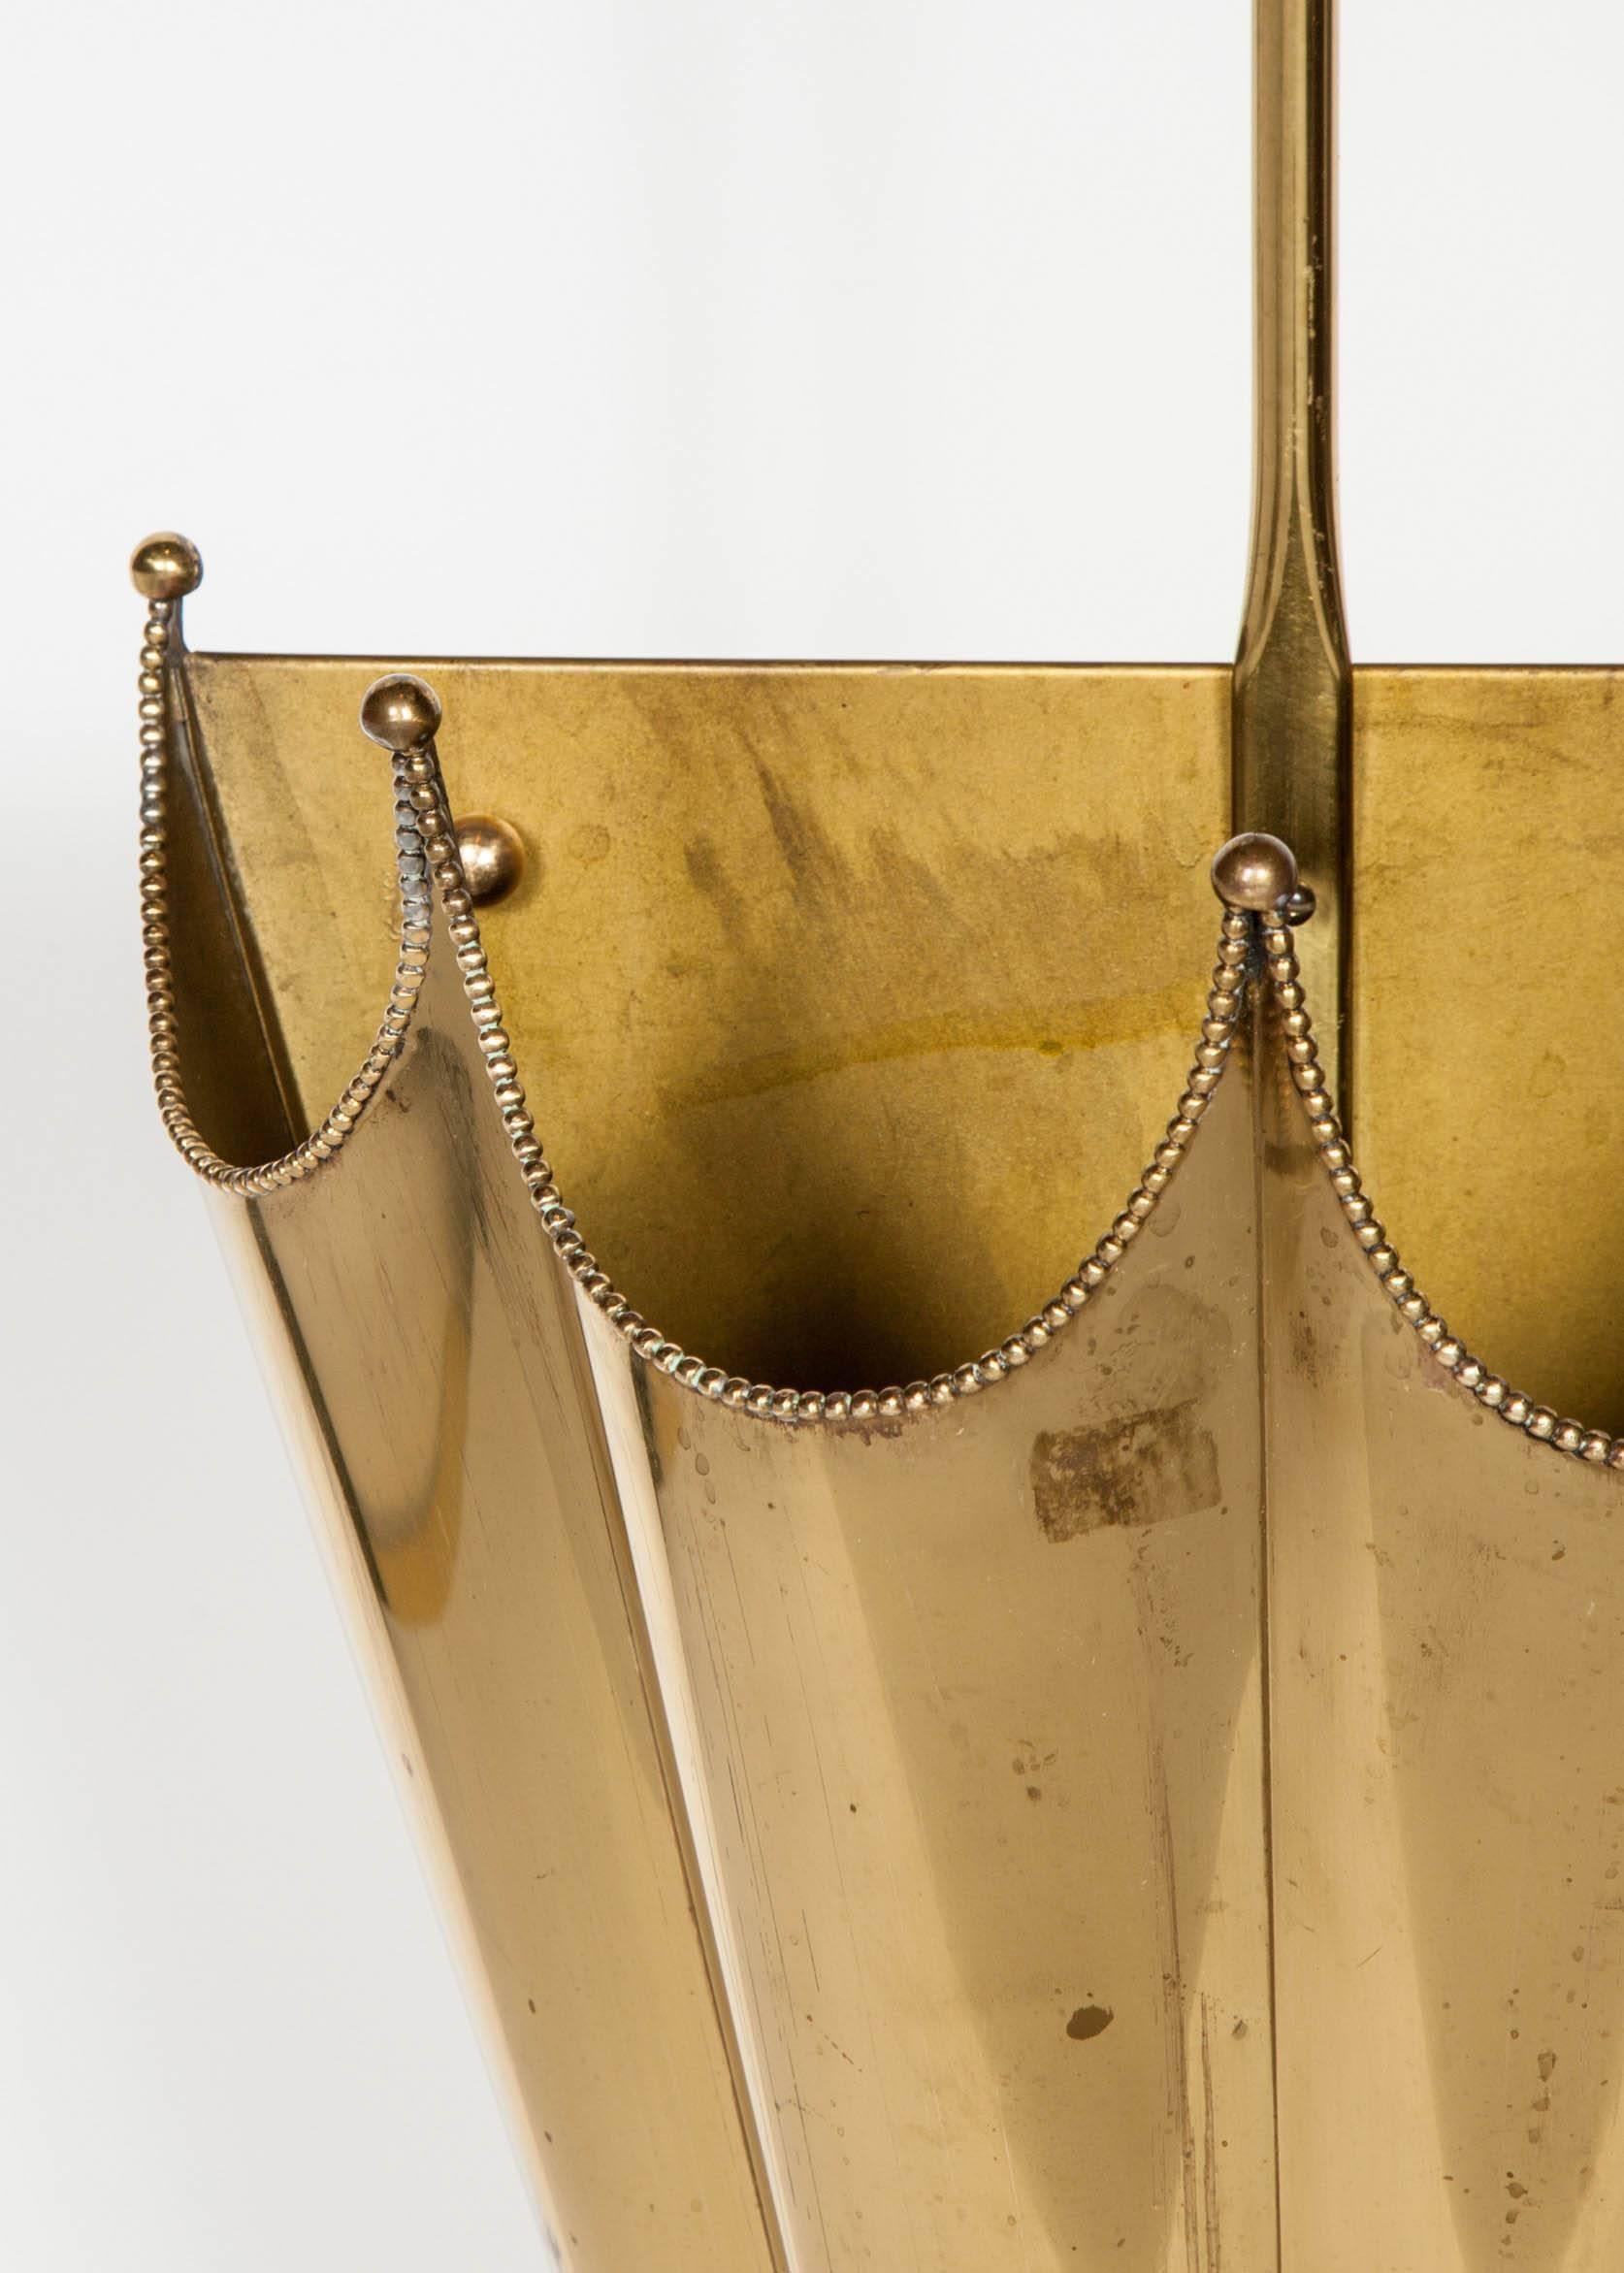 Elegant mid-century modern umbrella stand with footed parasol design. Features chain ball trimming along the upper rims, with brass ball finials along the peaks. Evident signs of patina throughout the brass frame, contribute to the charm of the